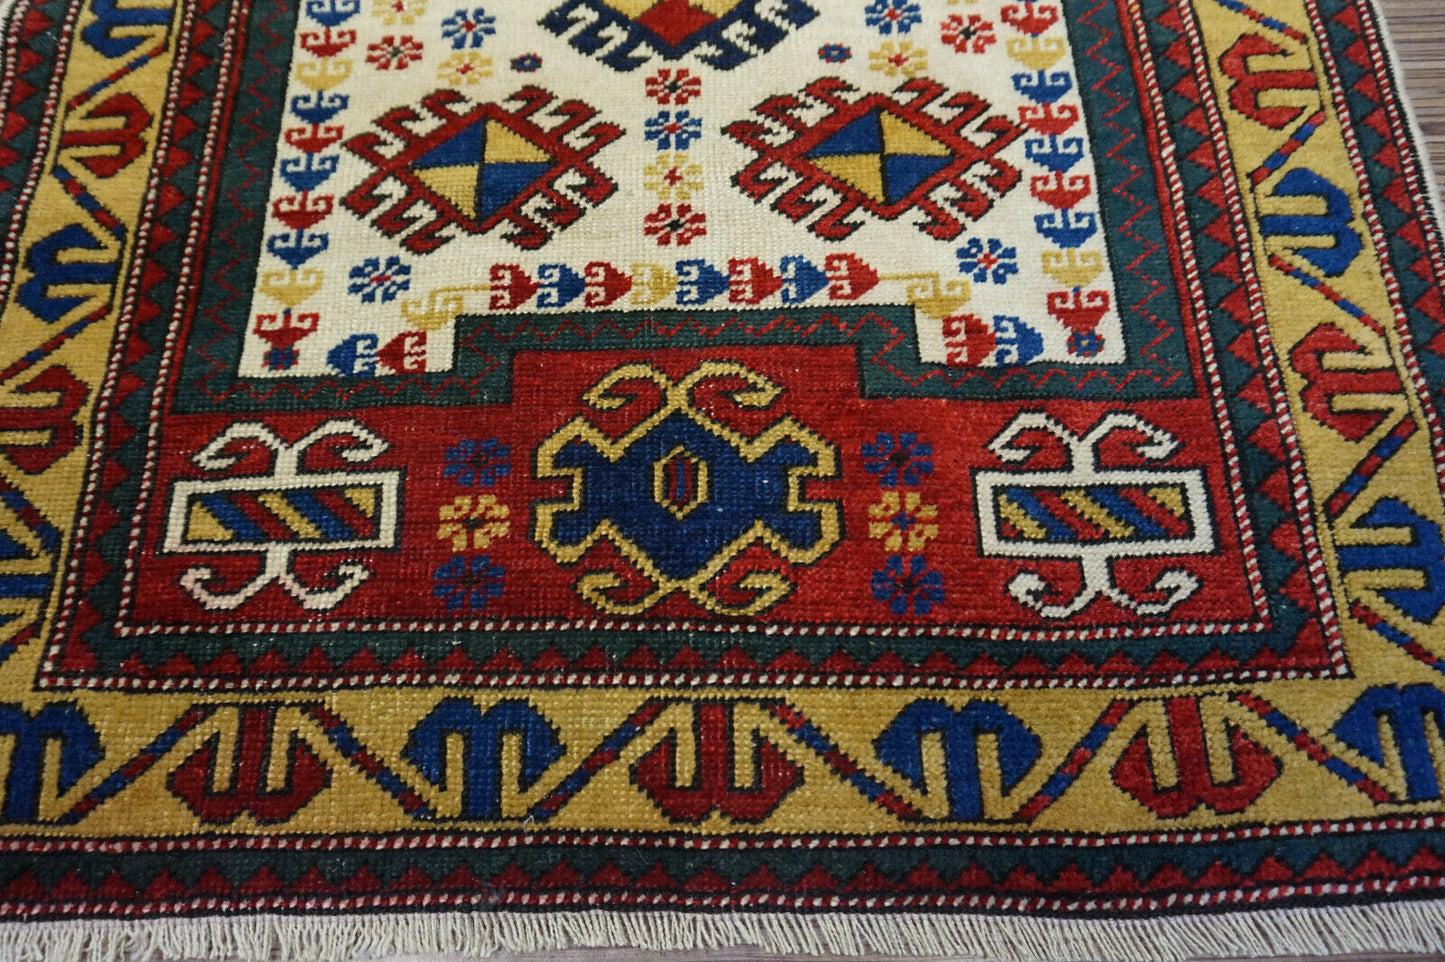 Detailed shot of the vibrant hues of red and blue on the Handmade Antique Caucasian Kazak Prayer Rug